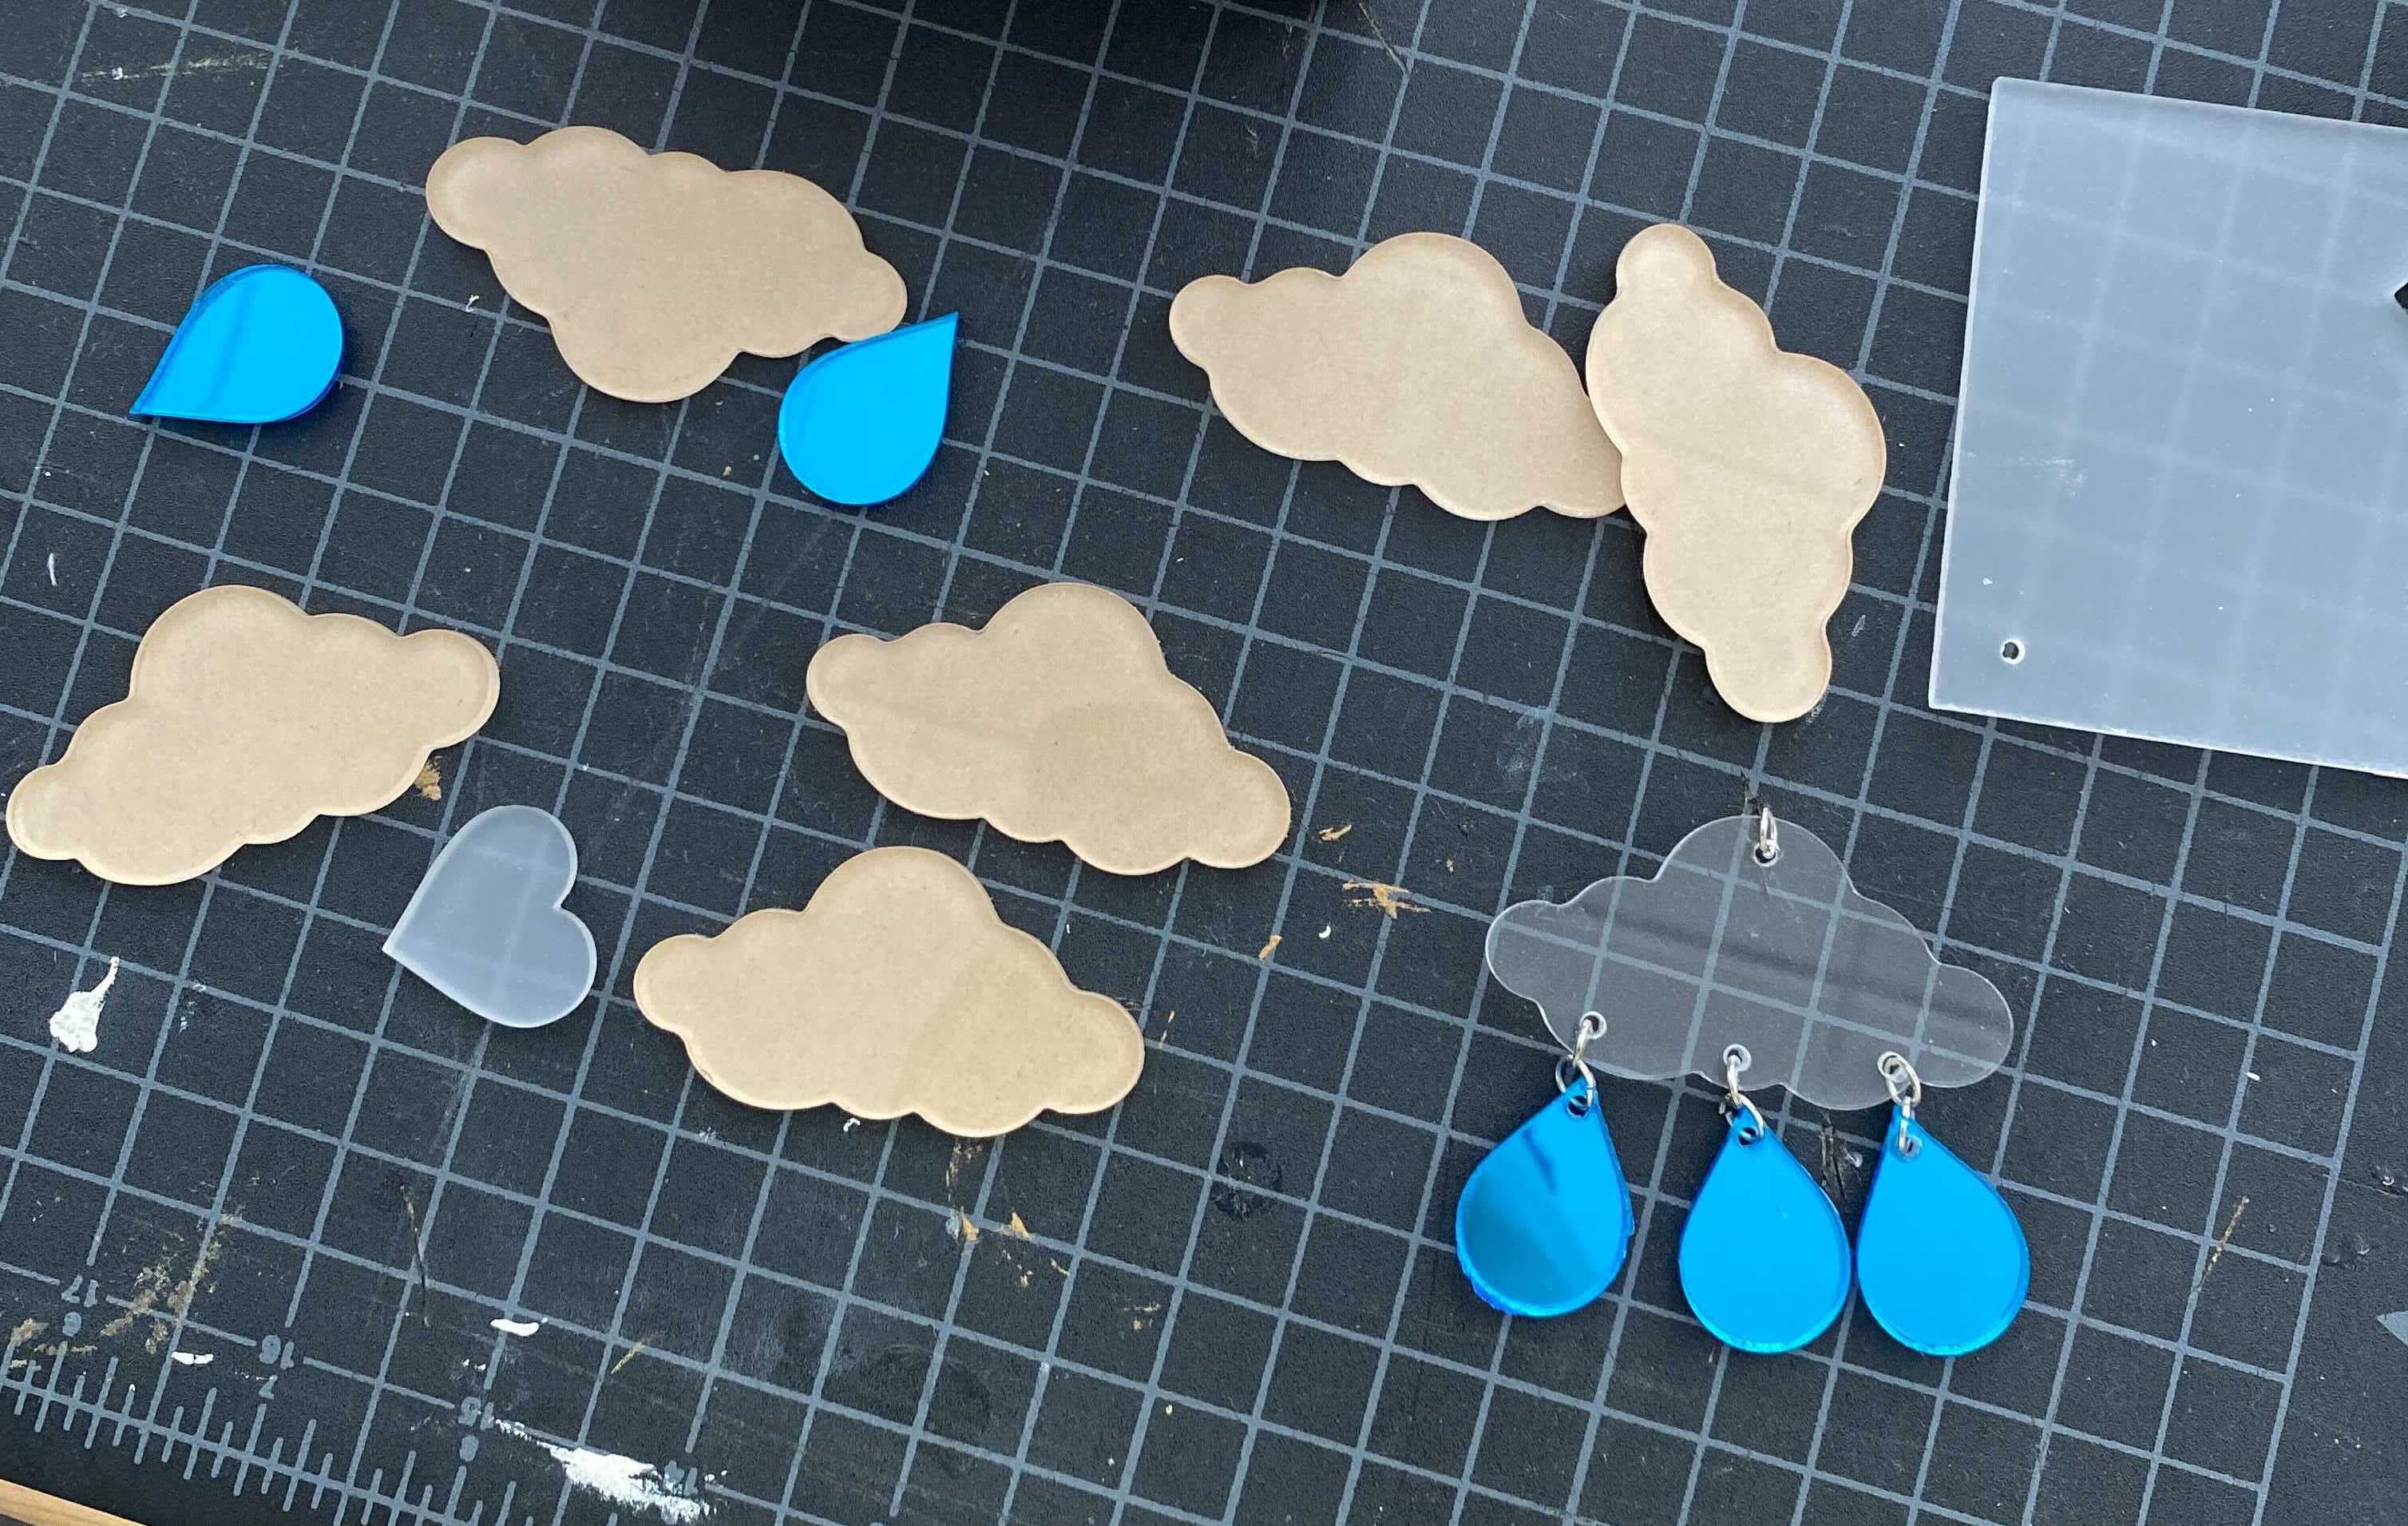 Image of laser cut acrylic pieces in the shape of clouds and raindrops